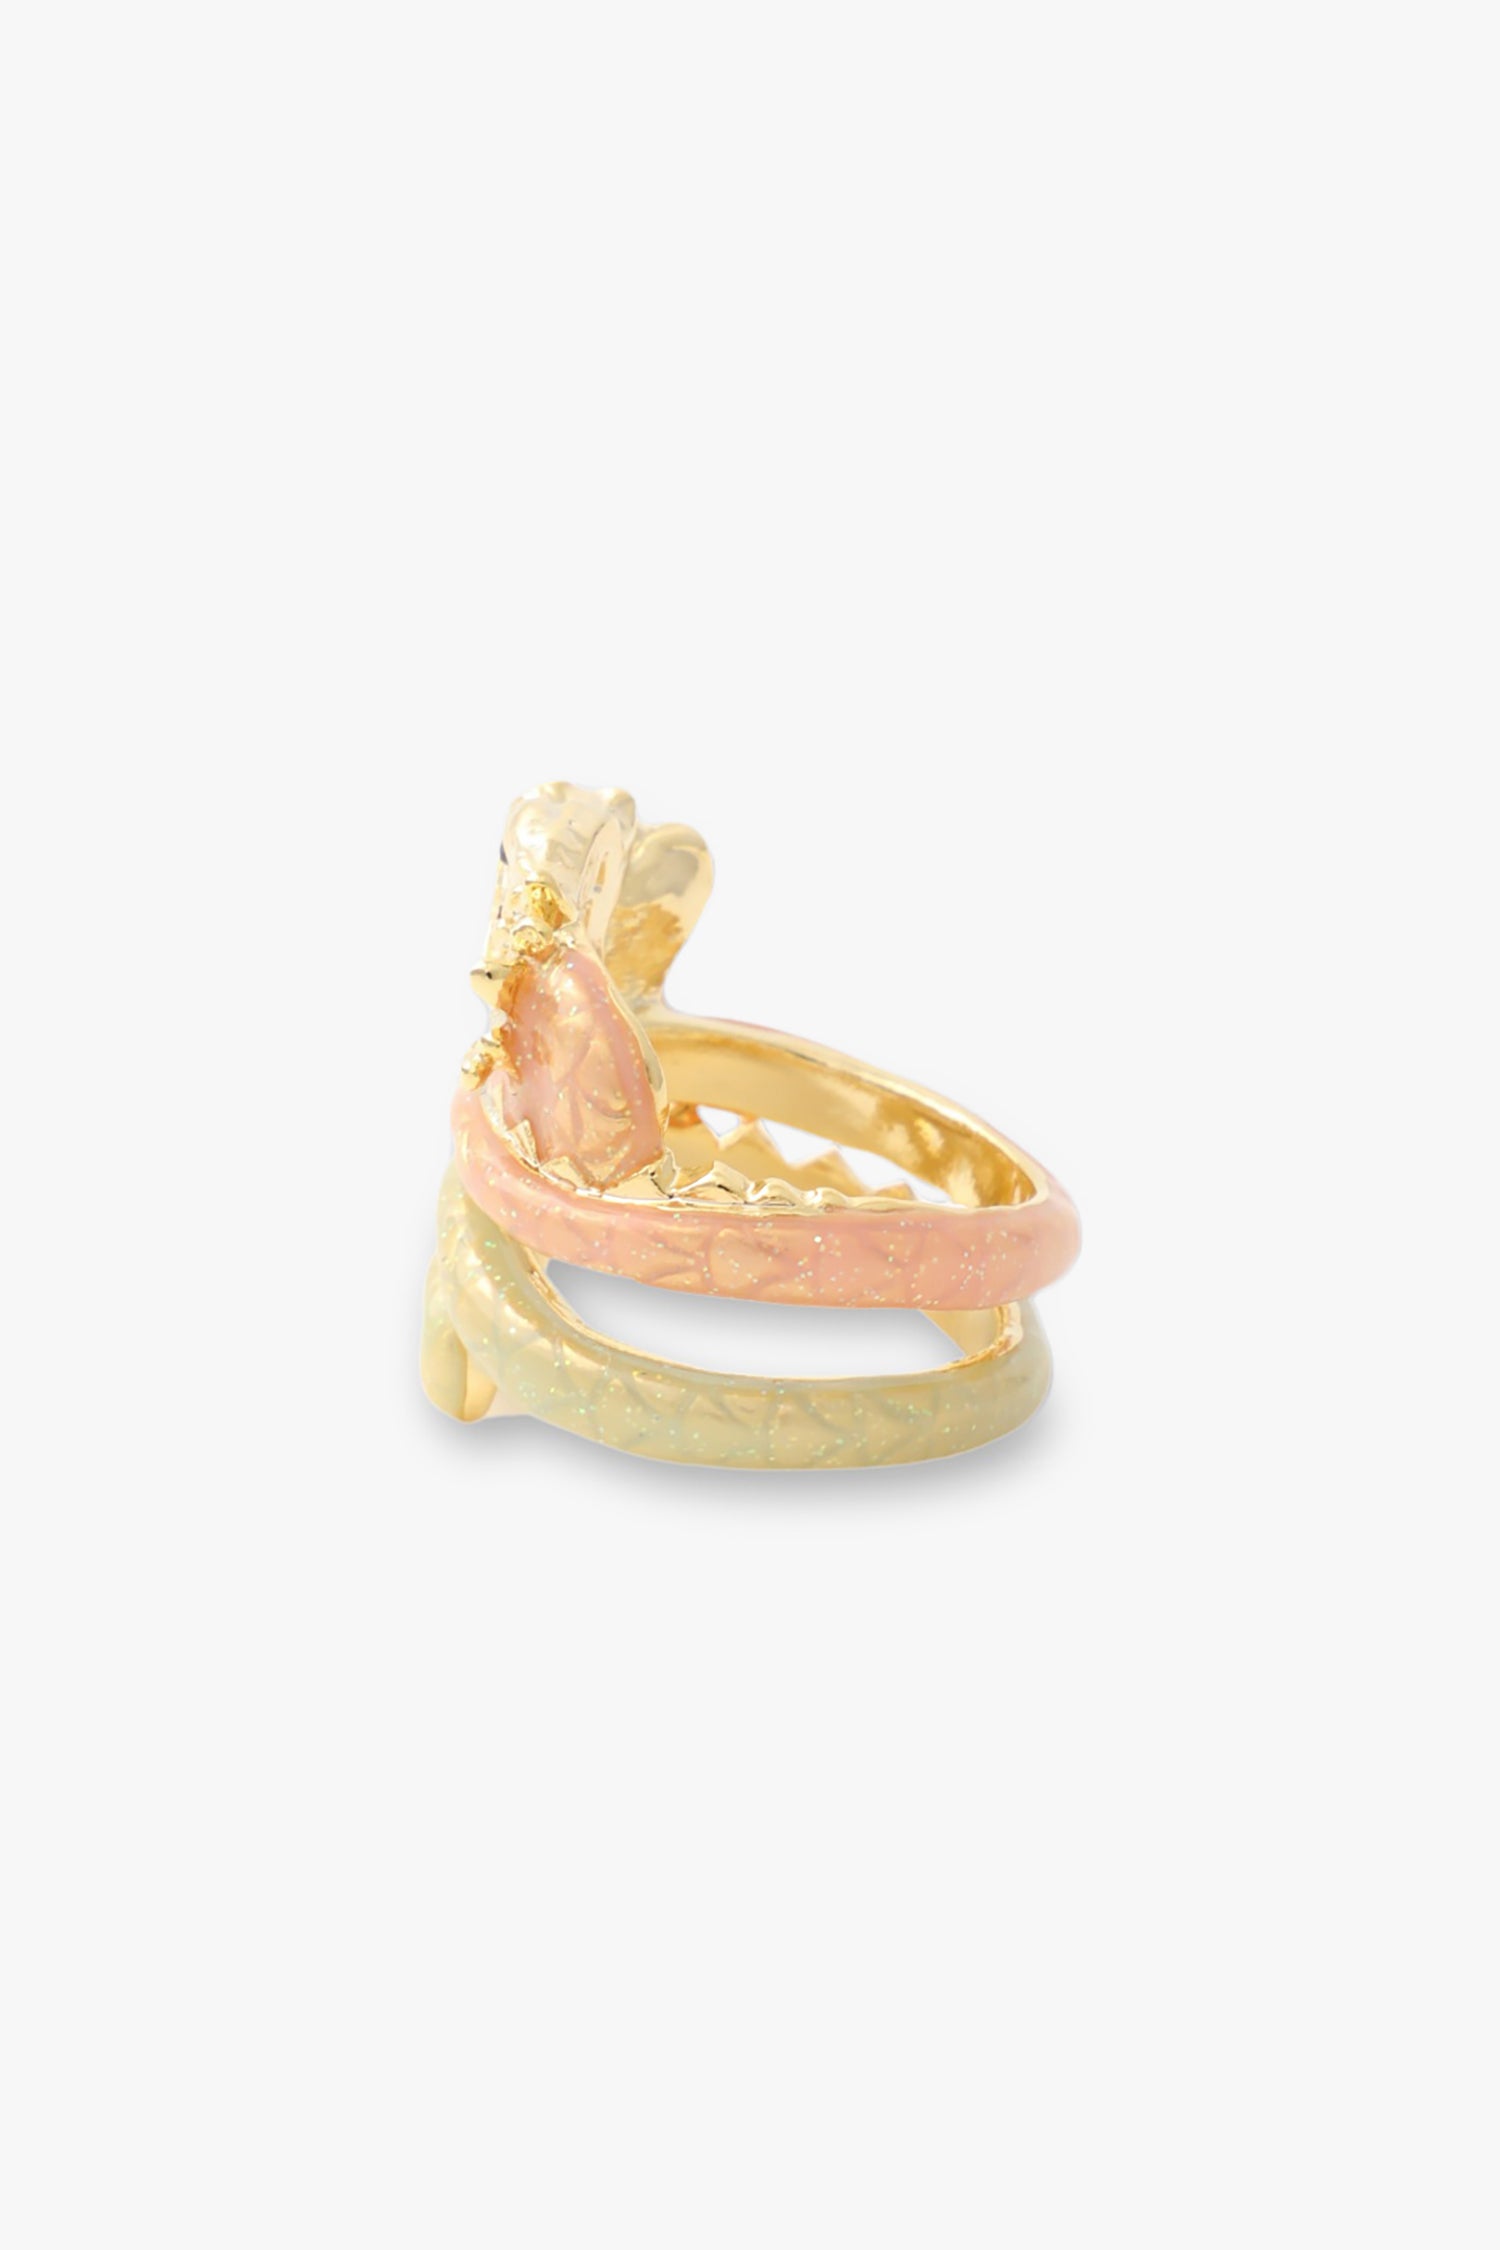 The coiled style gold ring accented with the brand's iconic Anna Sui rose